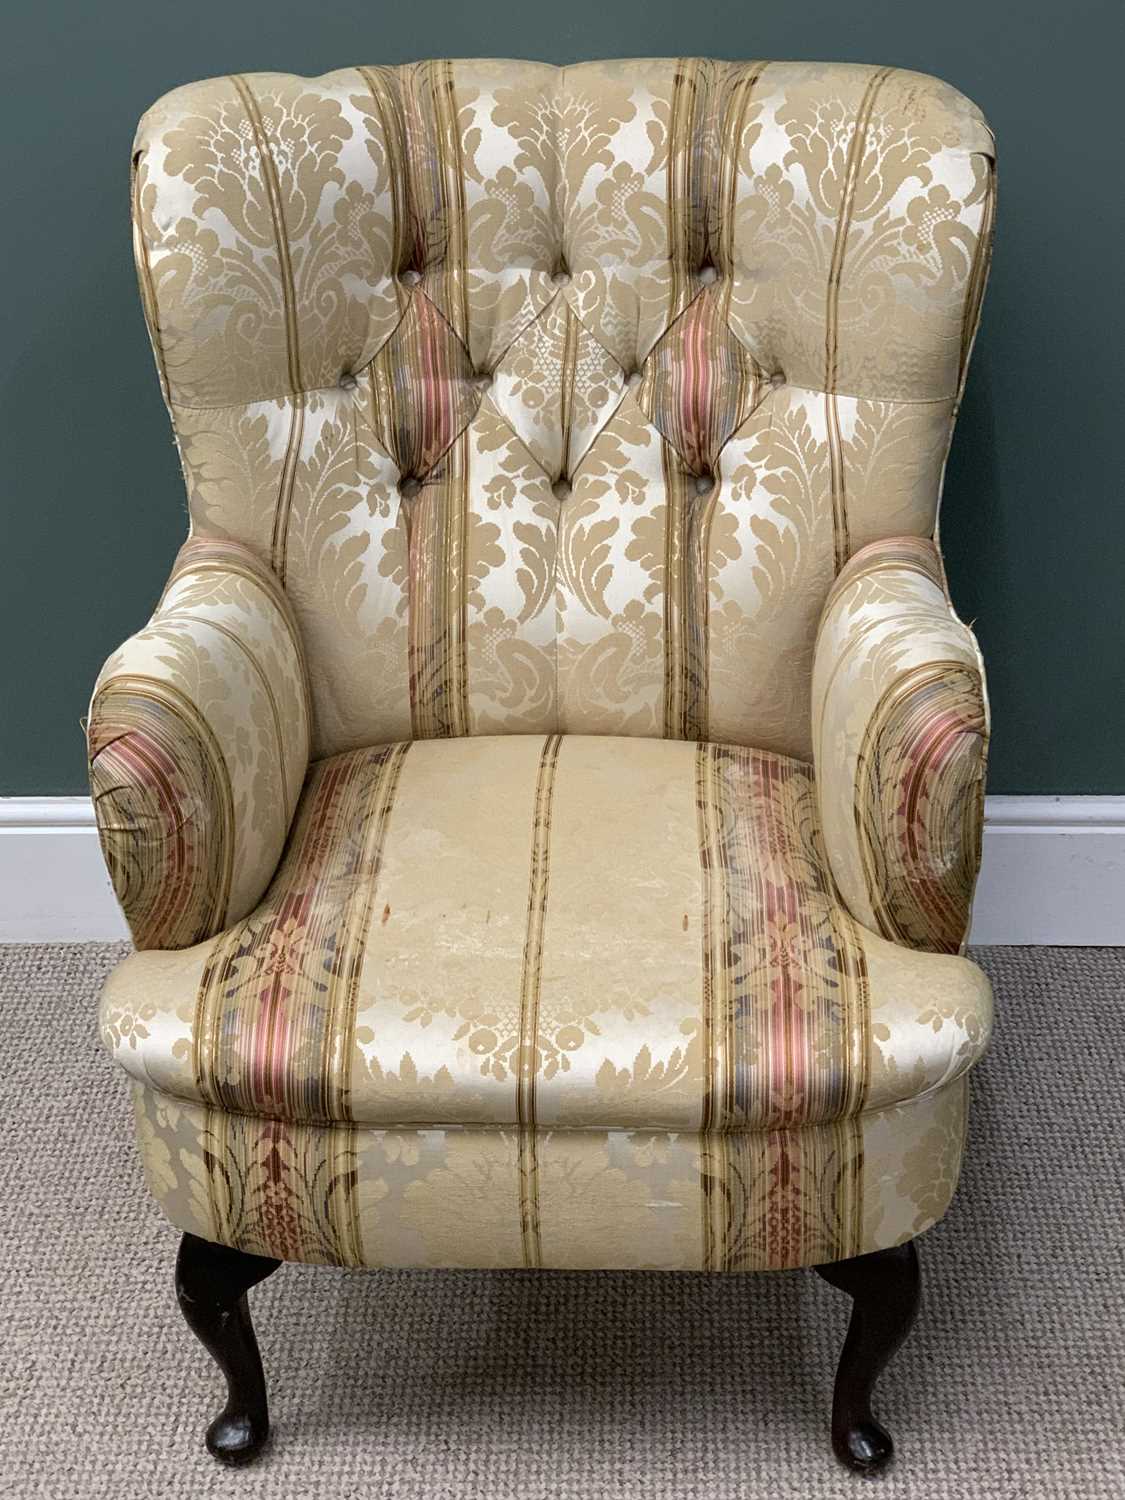 VINTAGE BUTTON BACK & UPHOLSTERED EASY CHAIR, 91 (h) x 66 (w) x 50 (d) cms Provenance: Private - Image 2 of 5